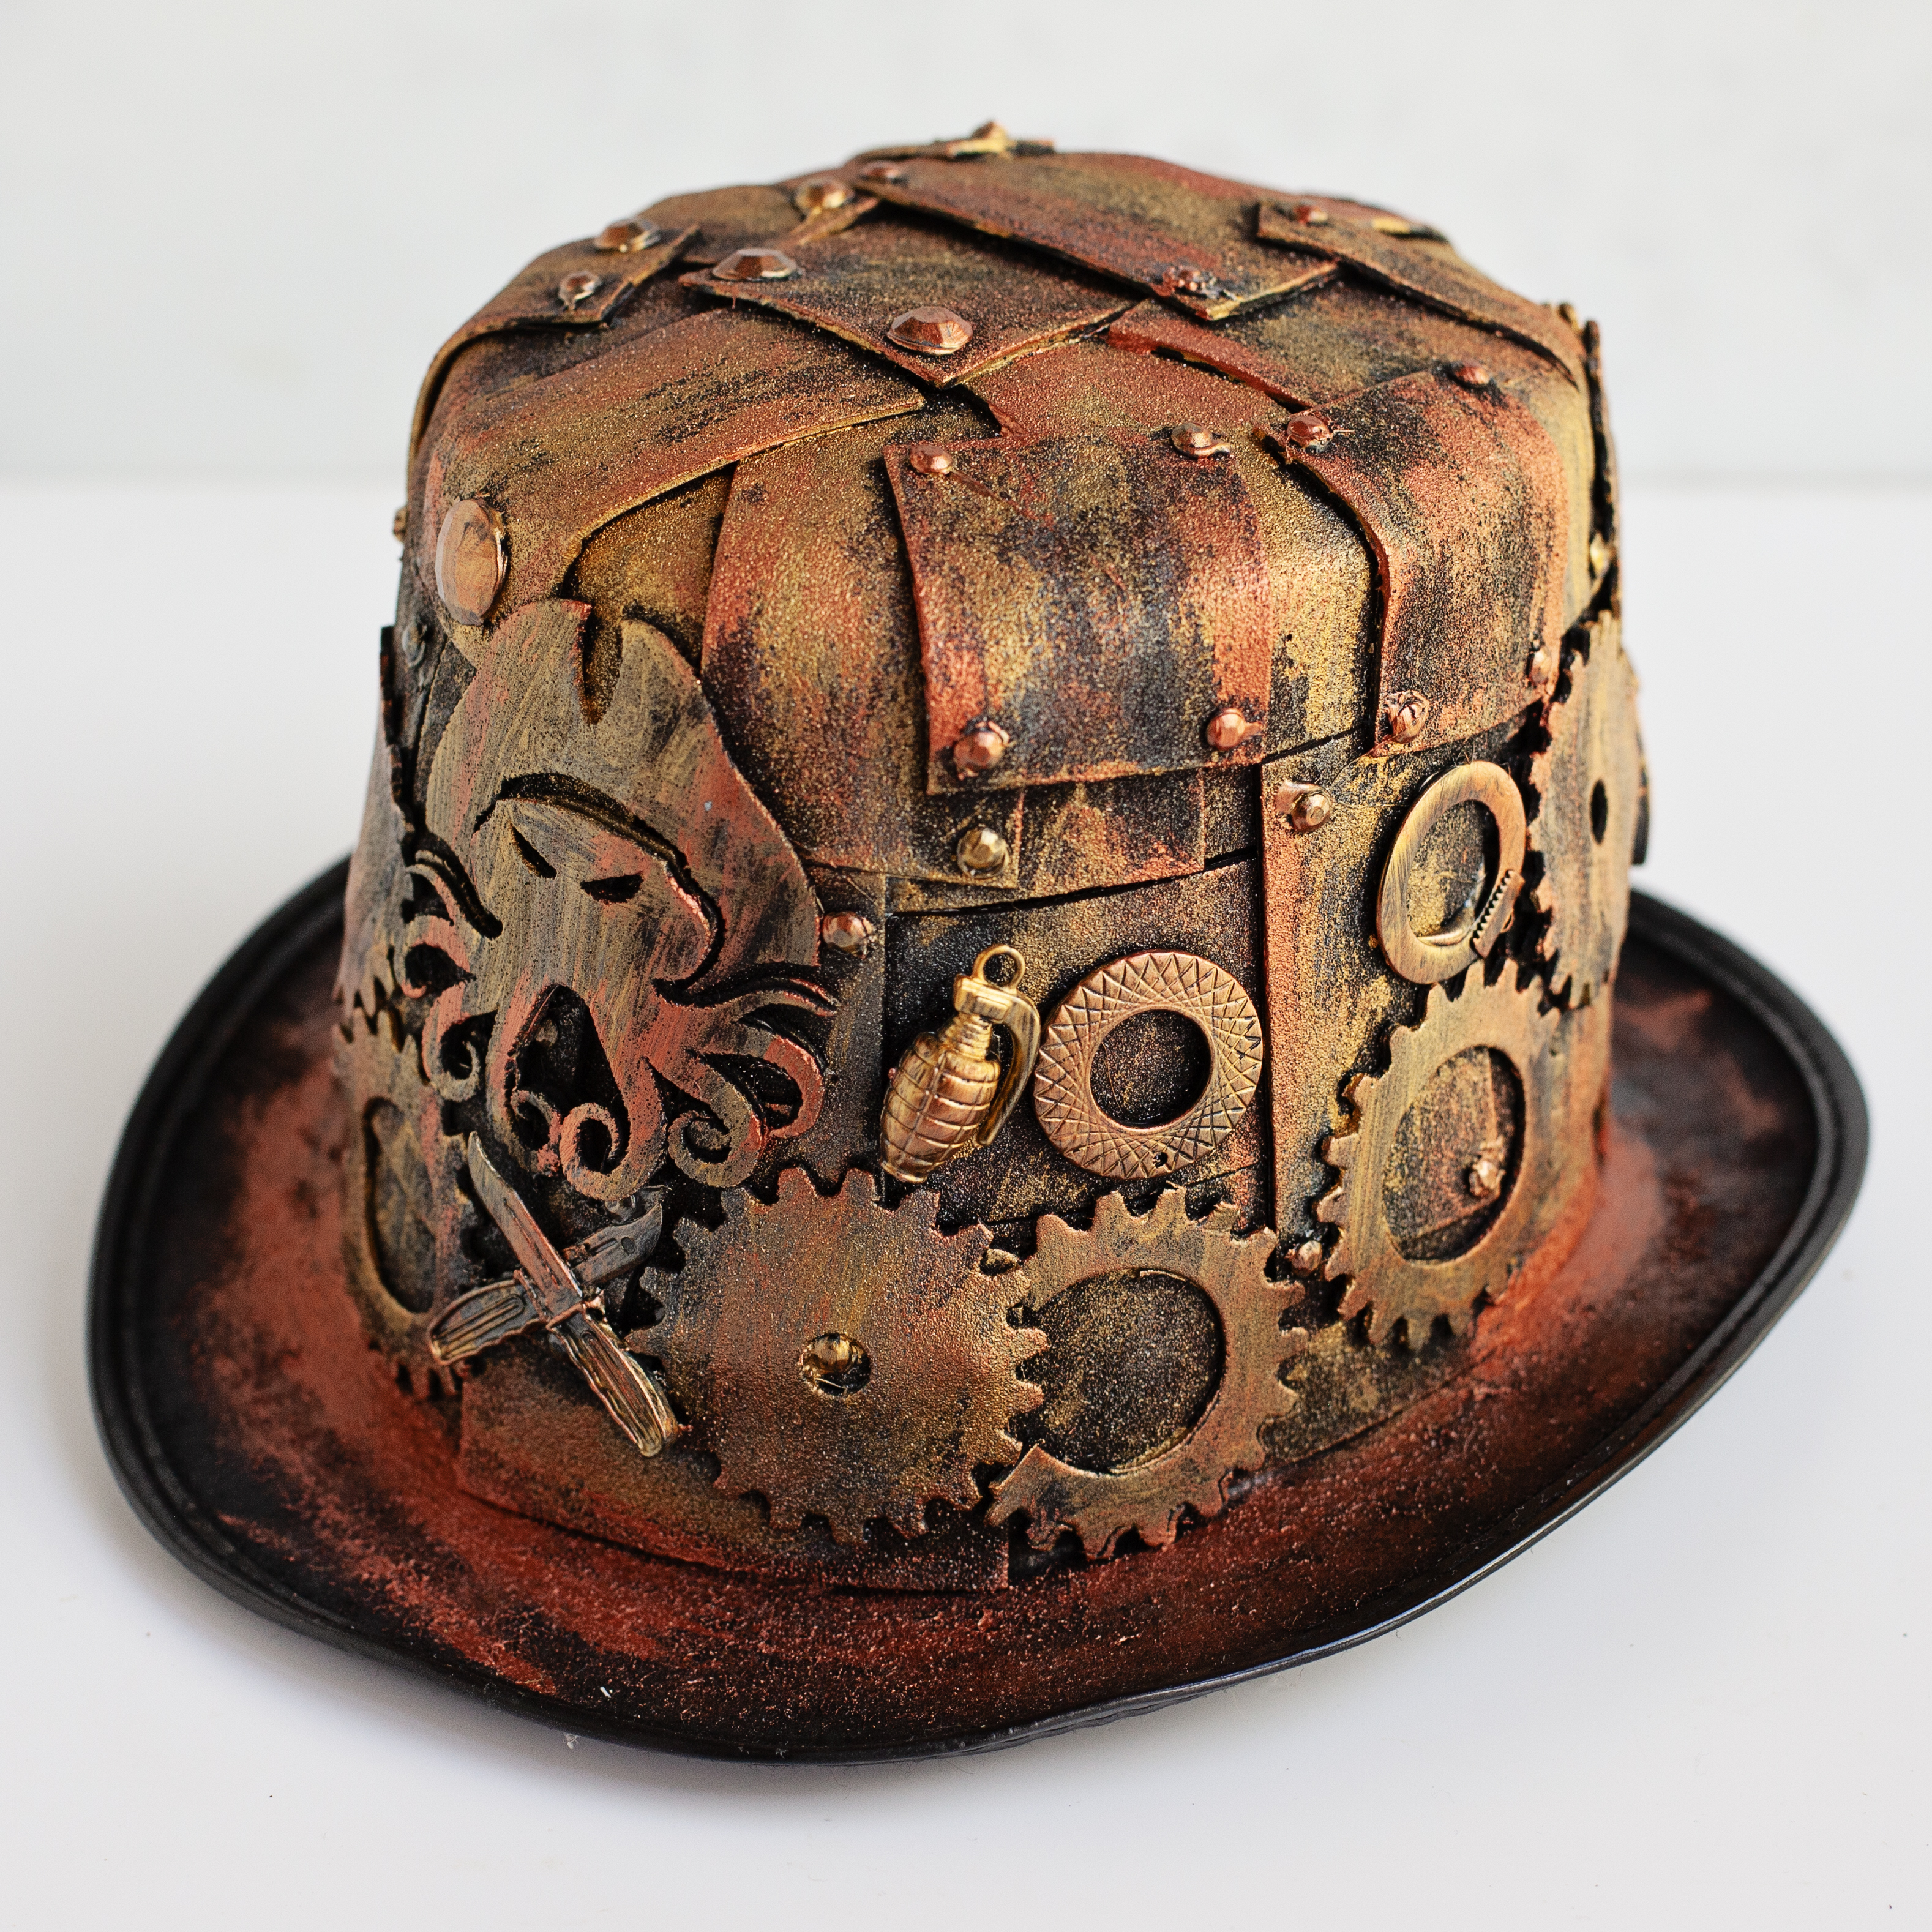 Steampunk Festival Tophat